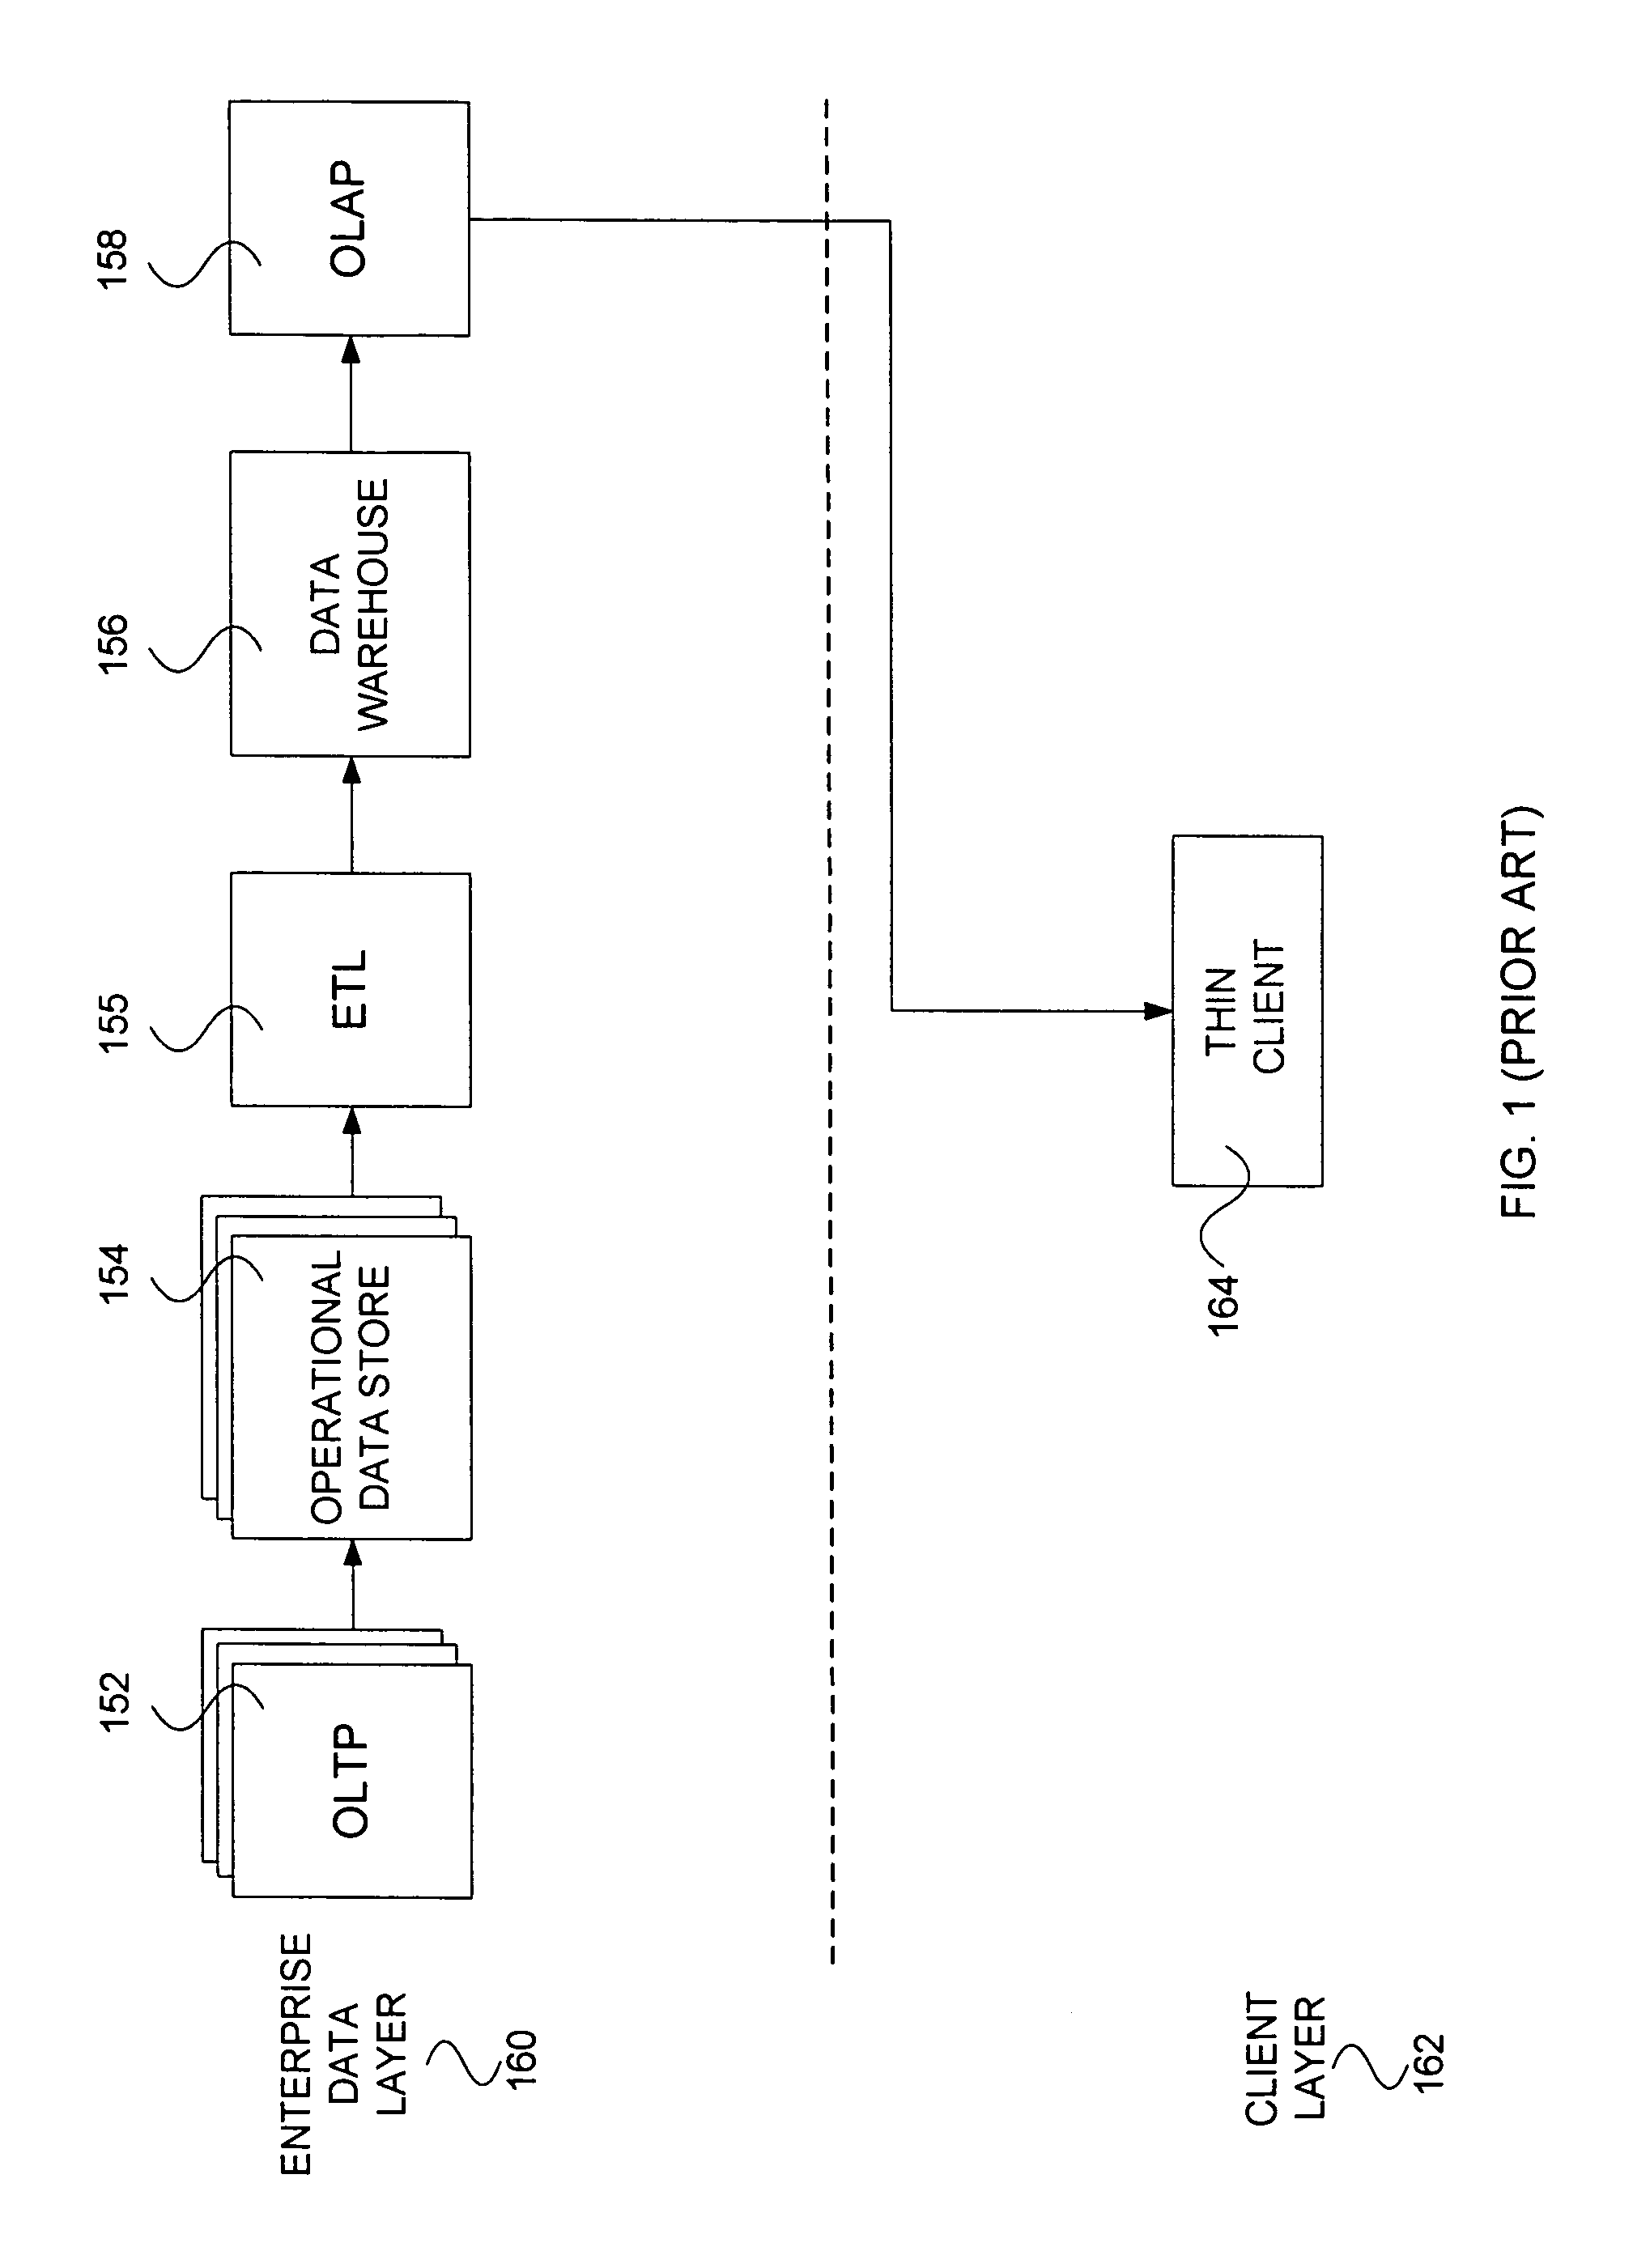 Architecture for general purpose near real-time business intelligence system and methods therefor